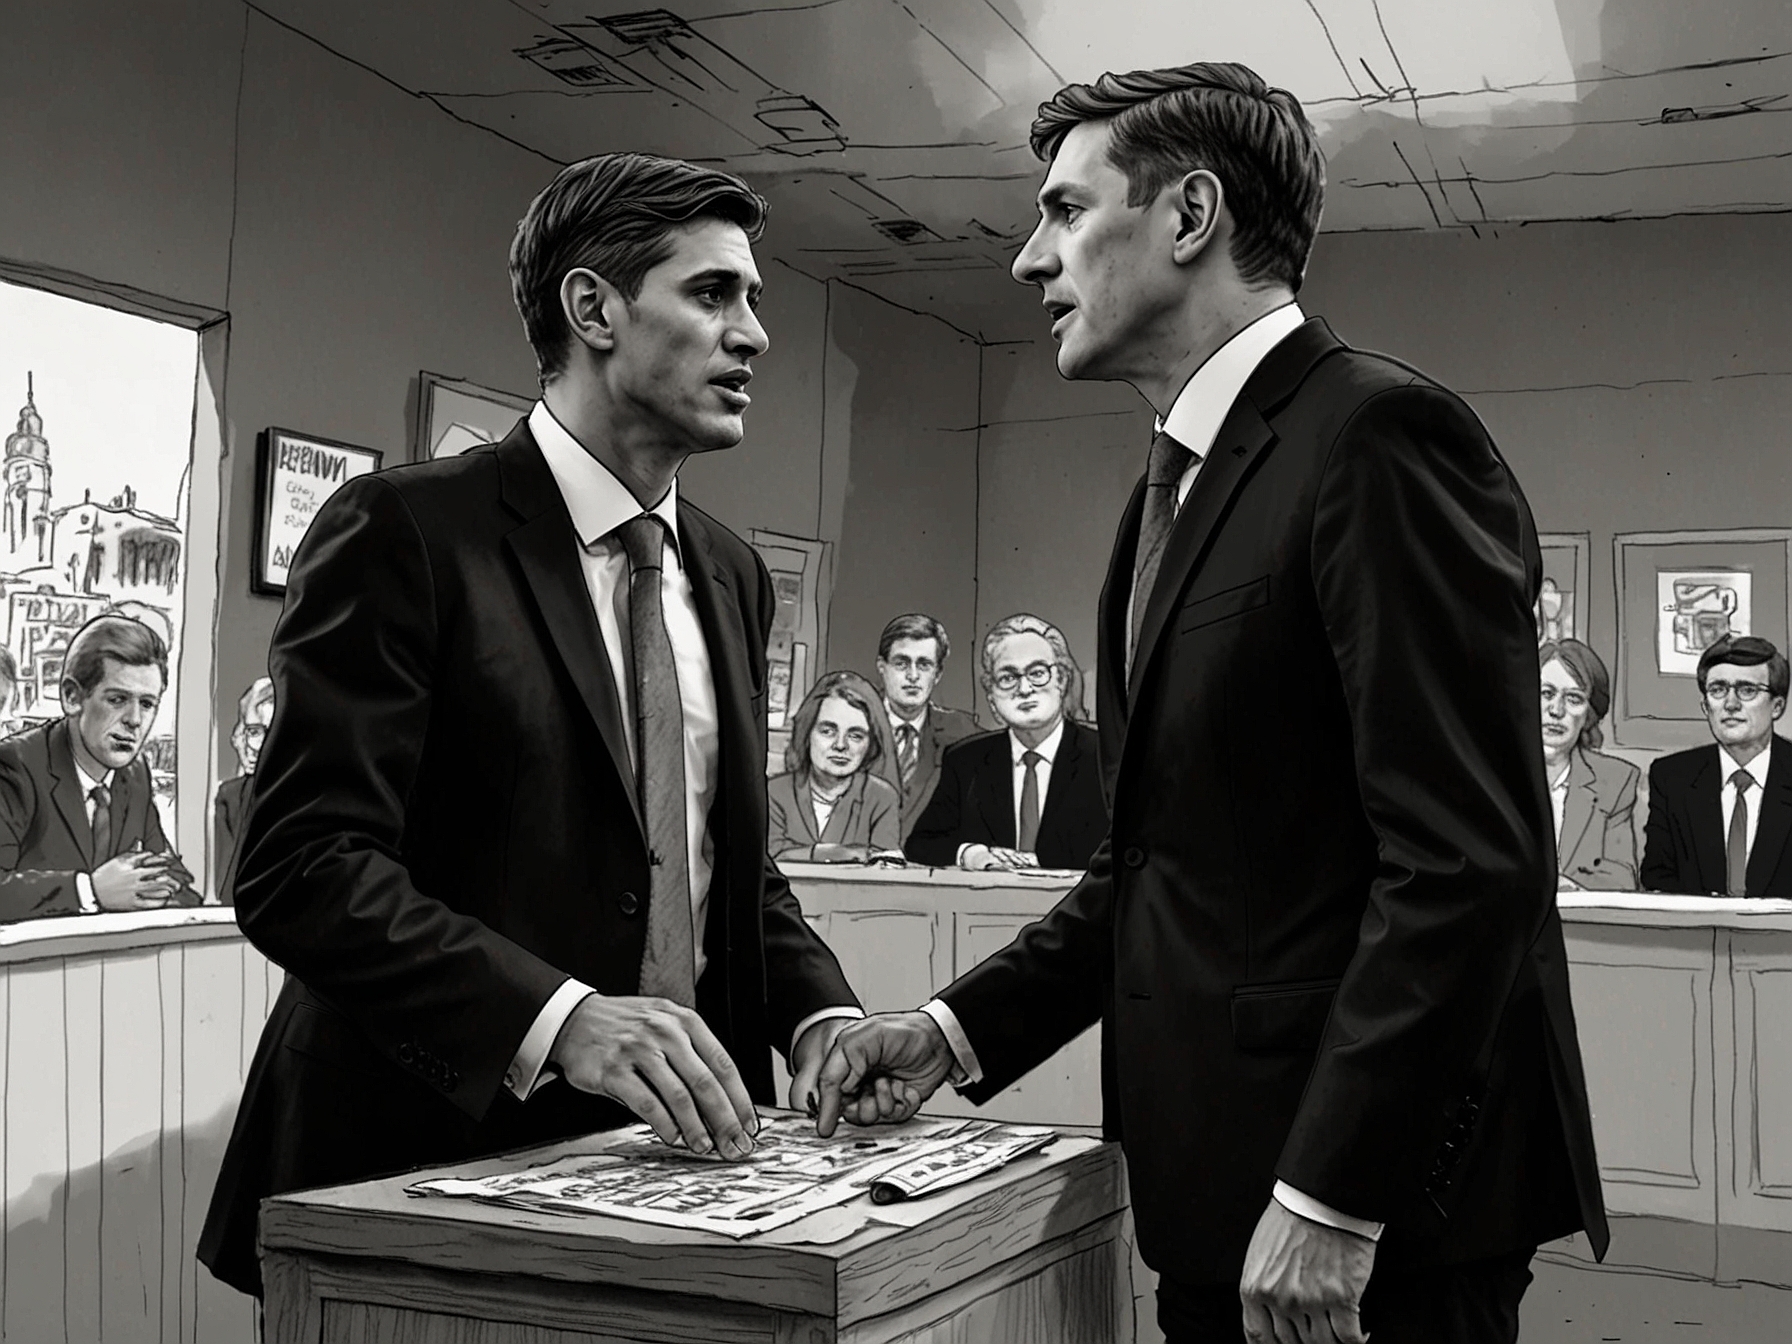 An intense moment captured from the final TV debate between Rishi Sunak and Keir Starmer, where they address the betting scandal overshadowing their campaigns.